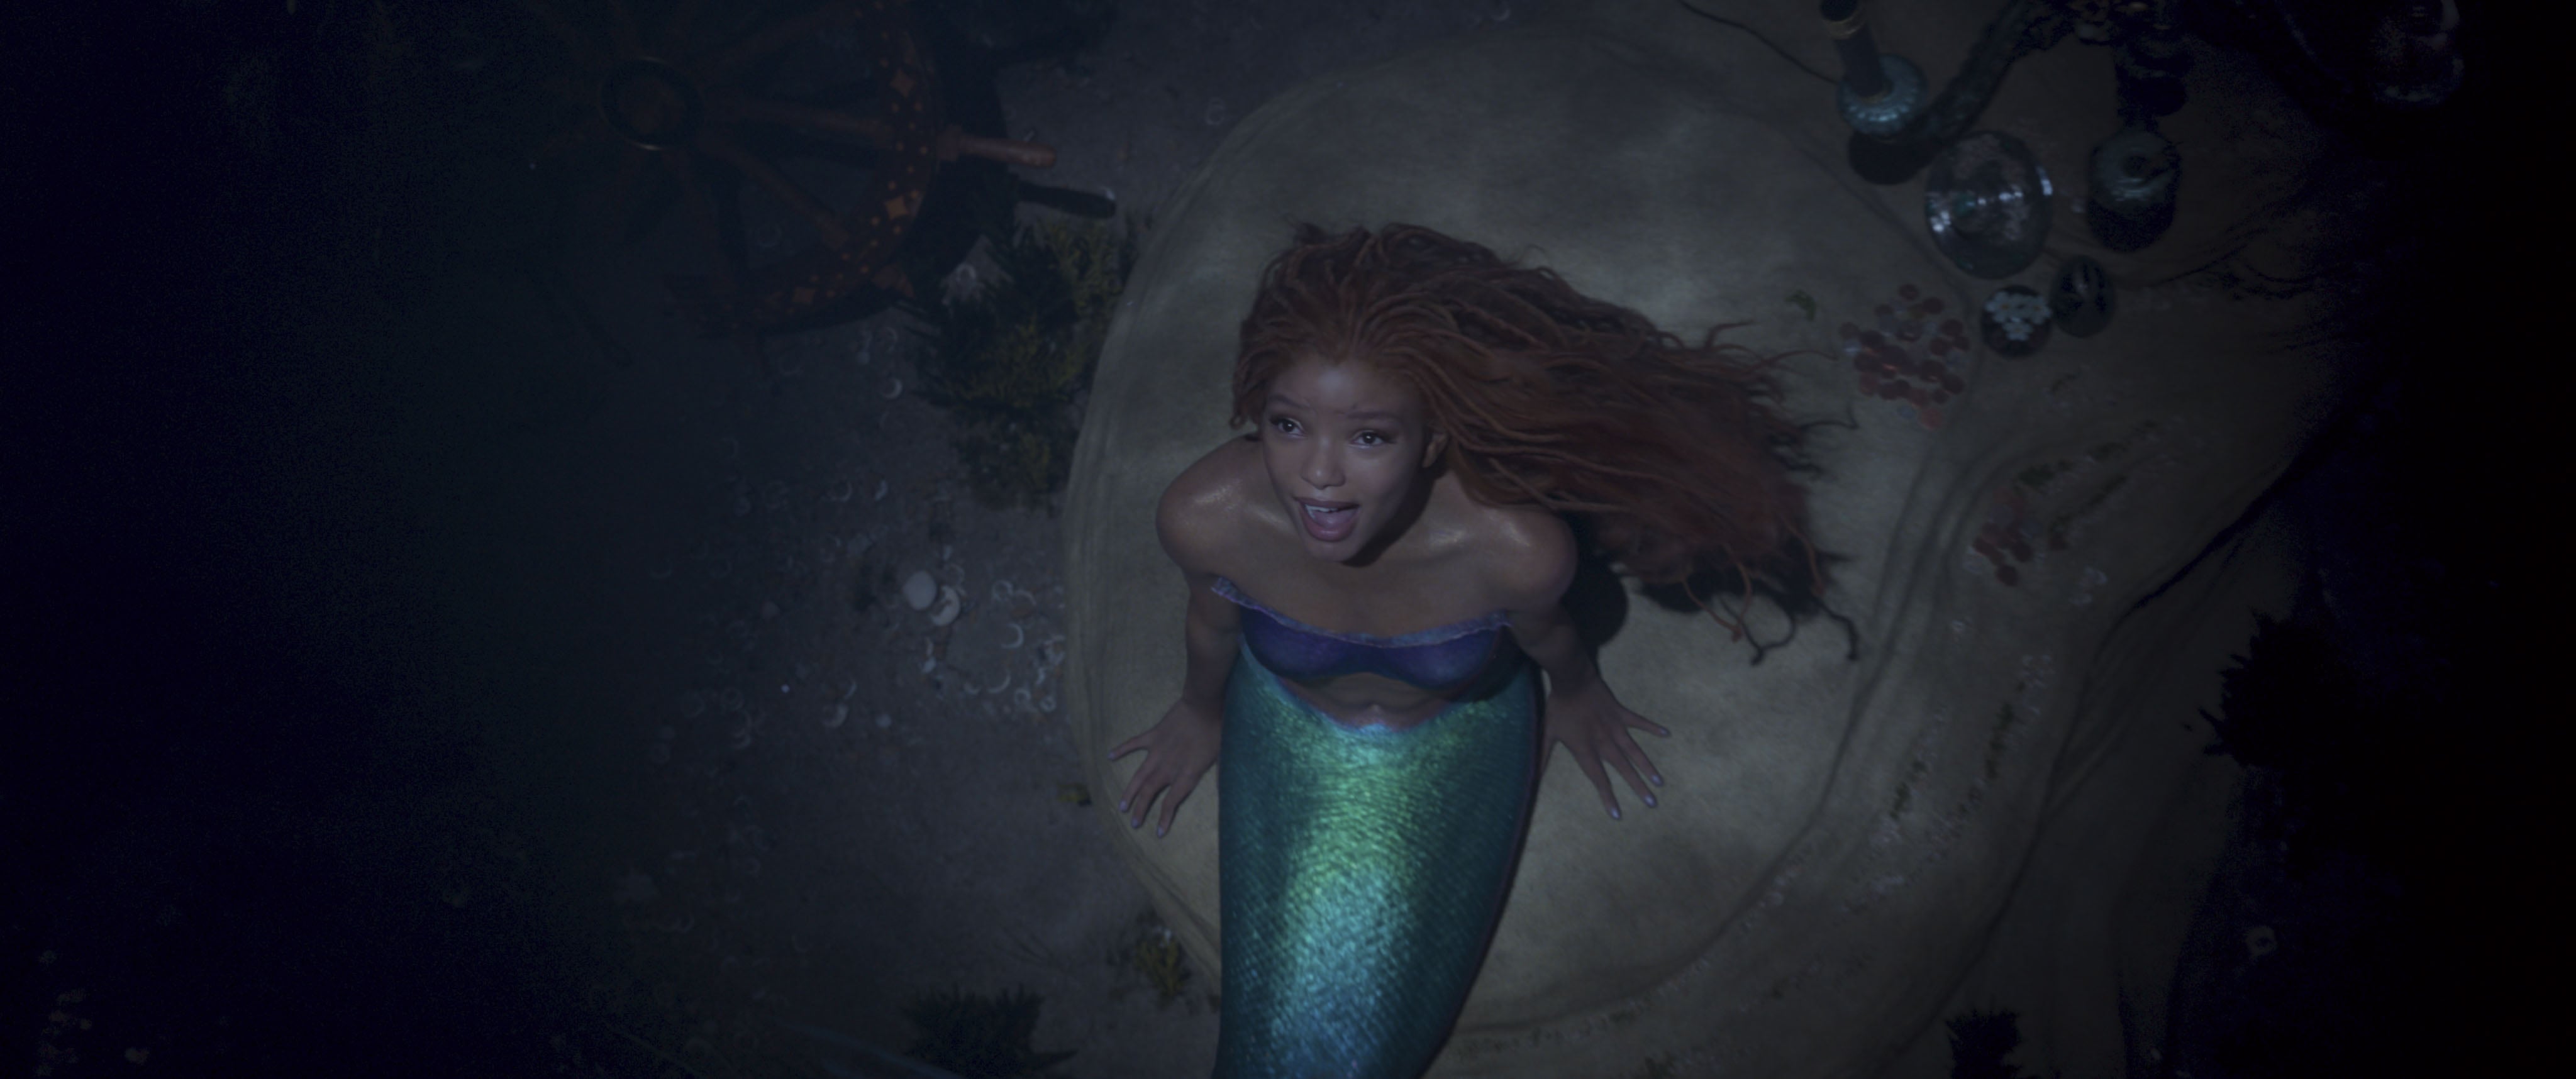 The Little Mermaid almost had Ursula as a mermaid